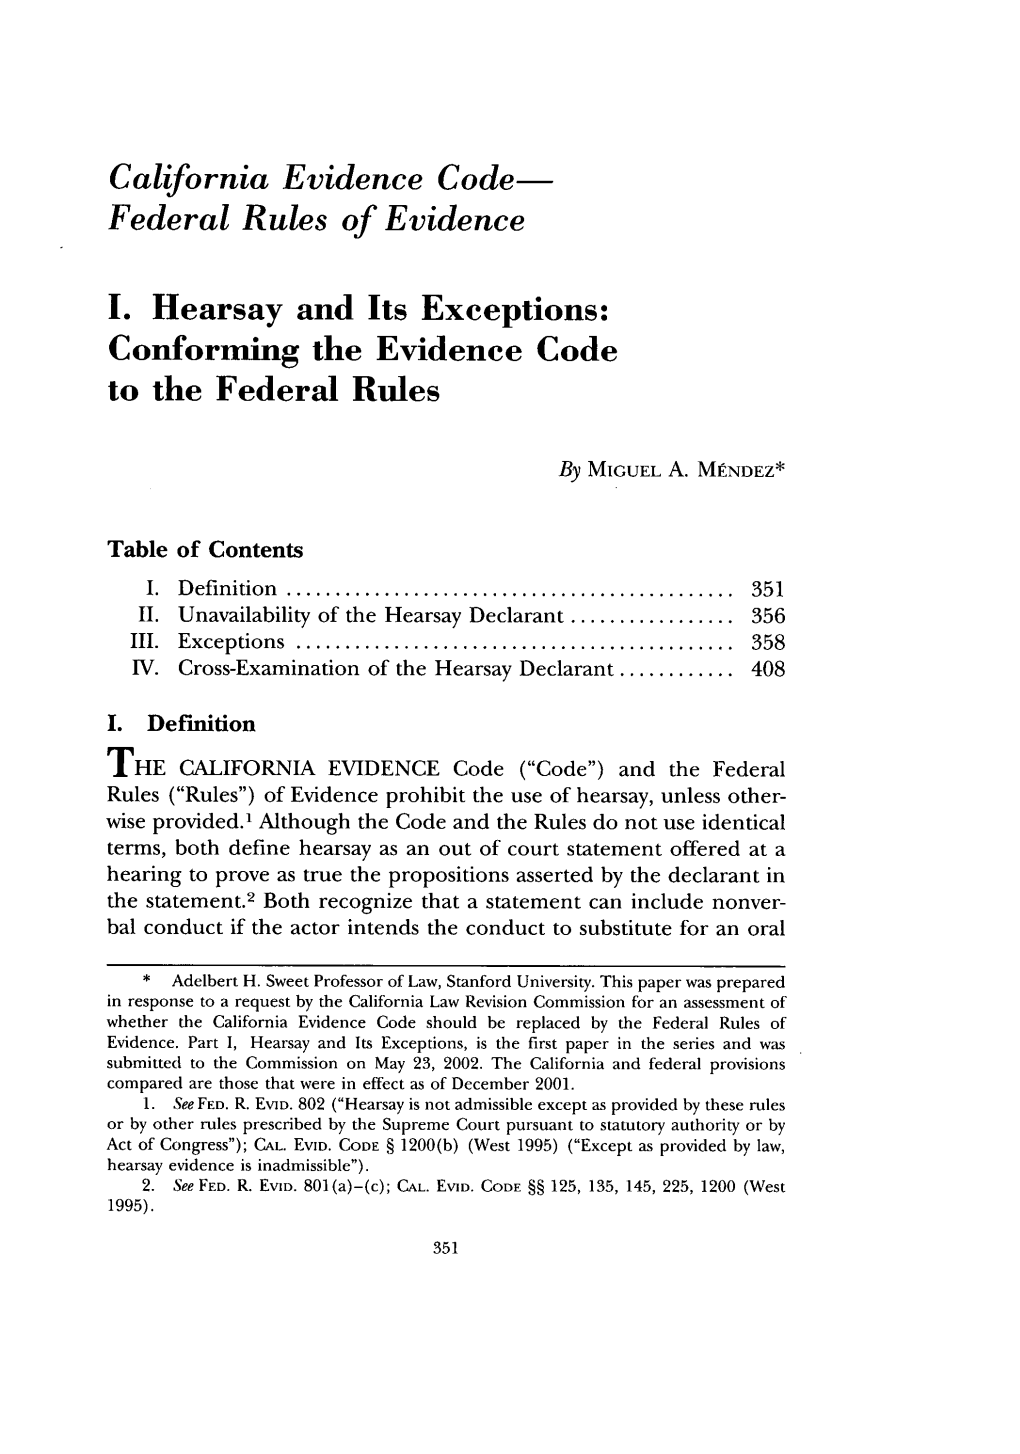 Hearsay and Its Exceptions: Conforming the Evidence Code to the Federal Rules